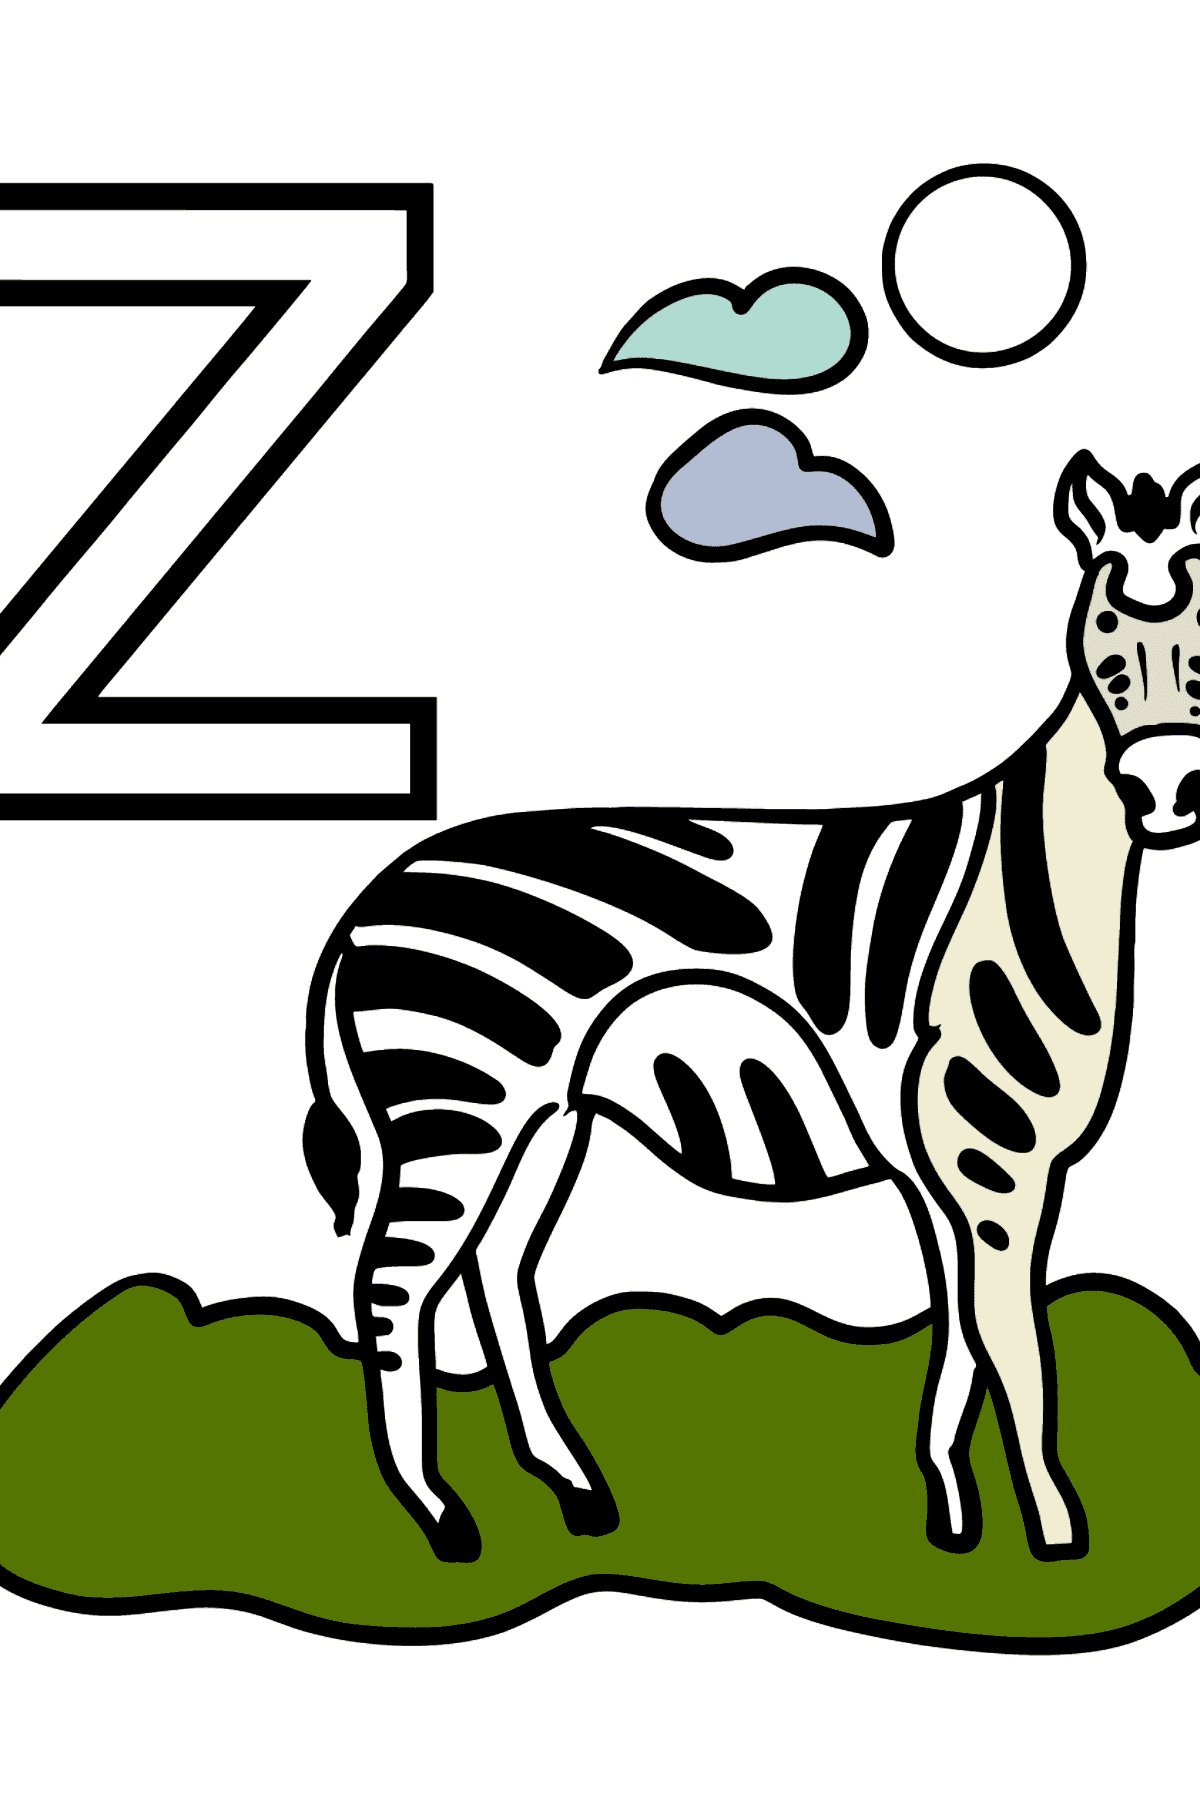 English Letter Z coloring pages - ZEBRA - Coloring Pages for Kids